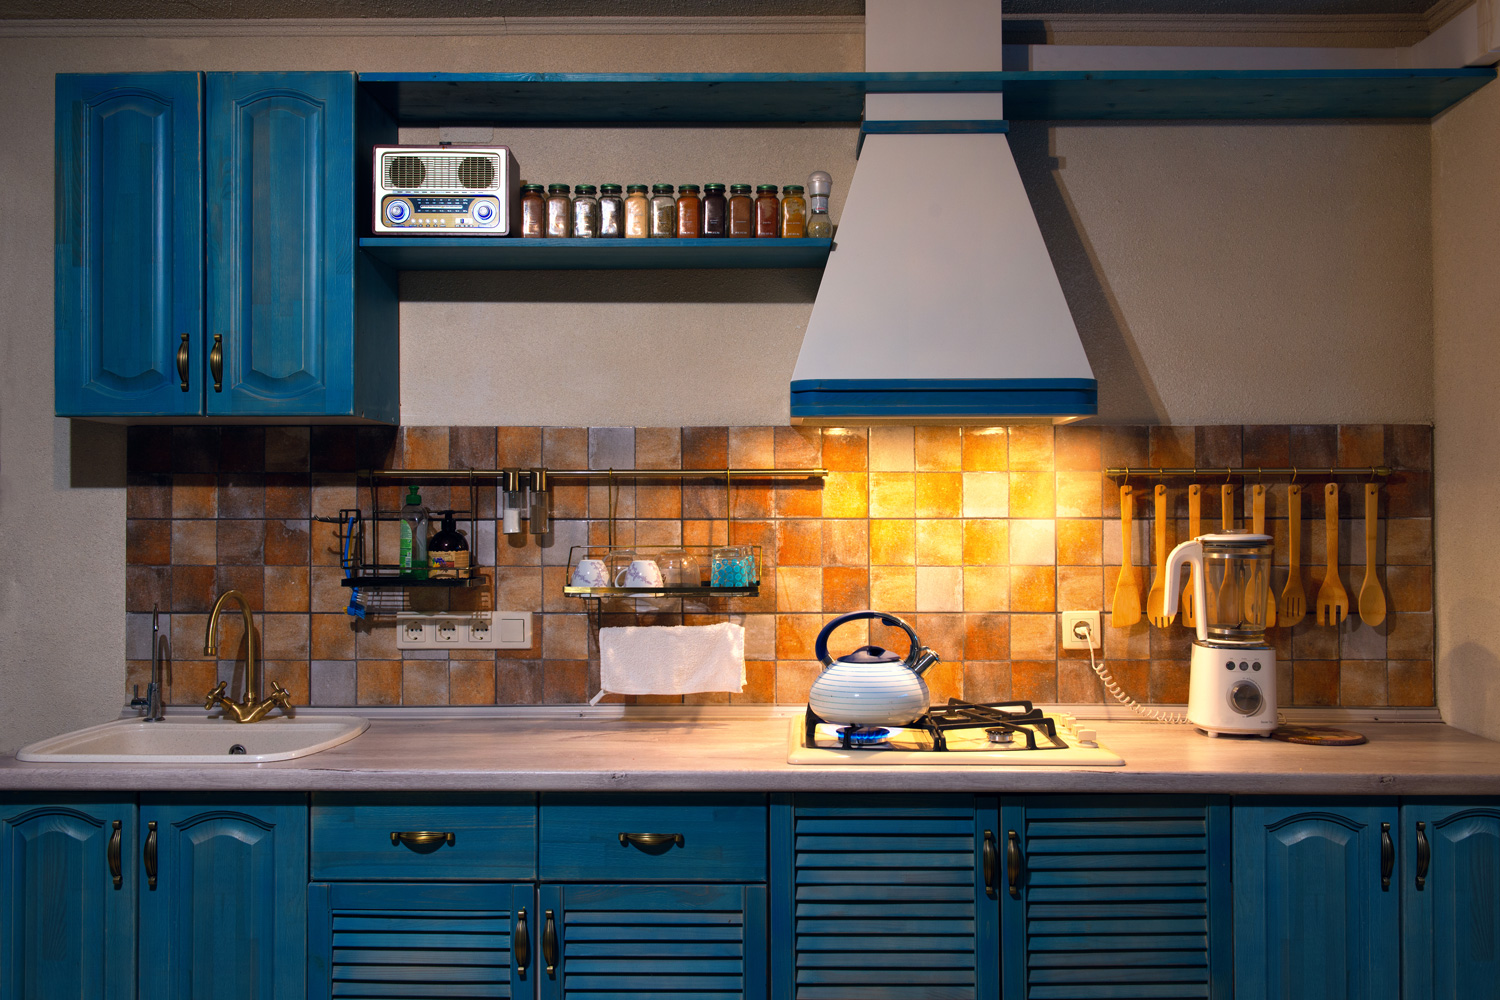 Kitchen with blue boiling kettle in the interior